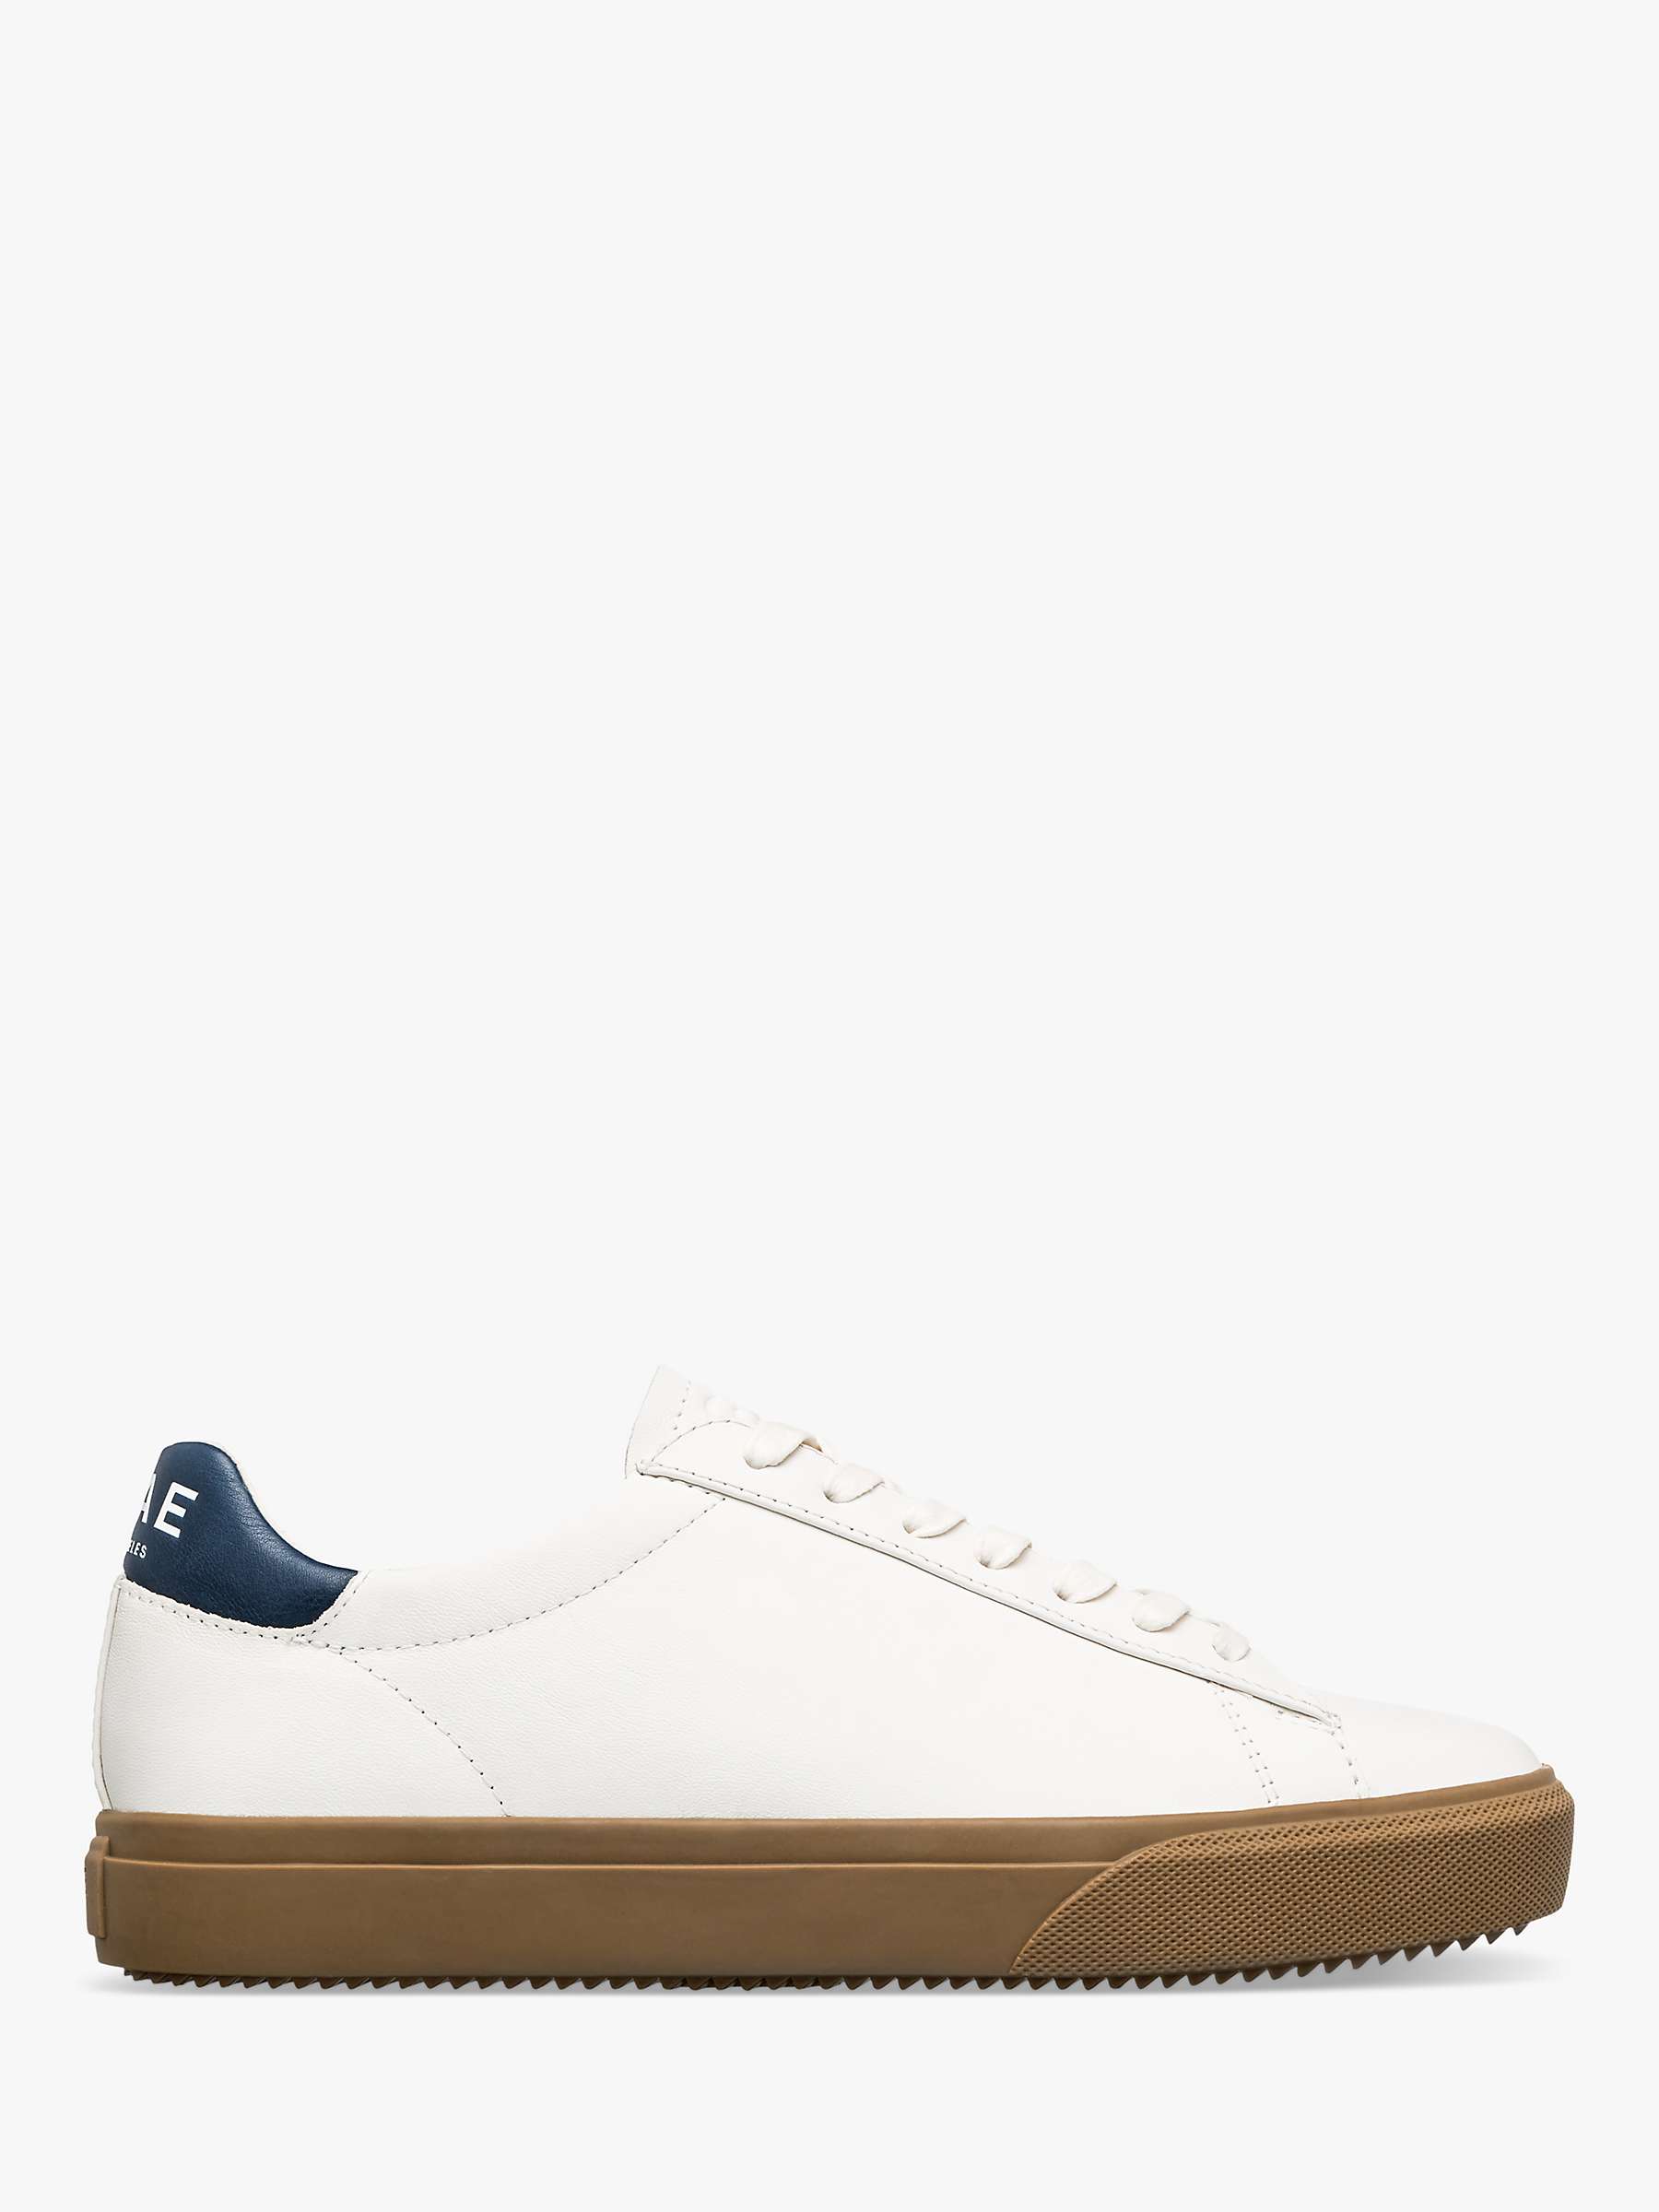 Buy CLAE Bradley Venice Leather Lace Up Trainers Online at johnlewis.com